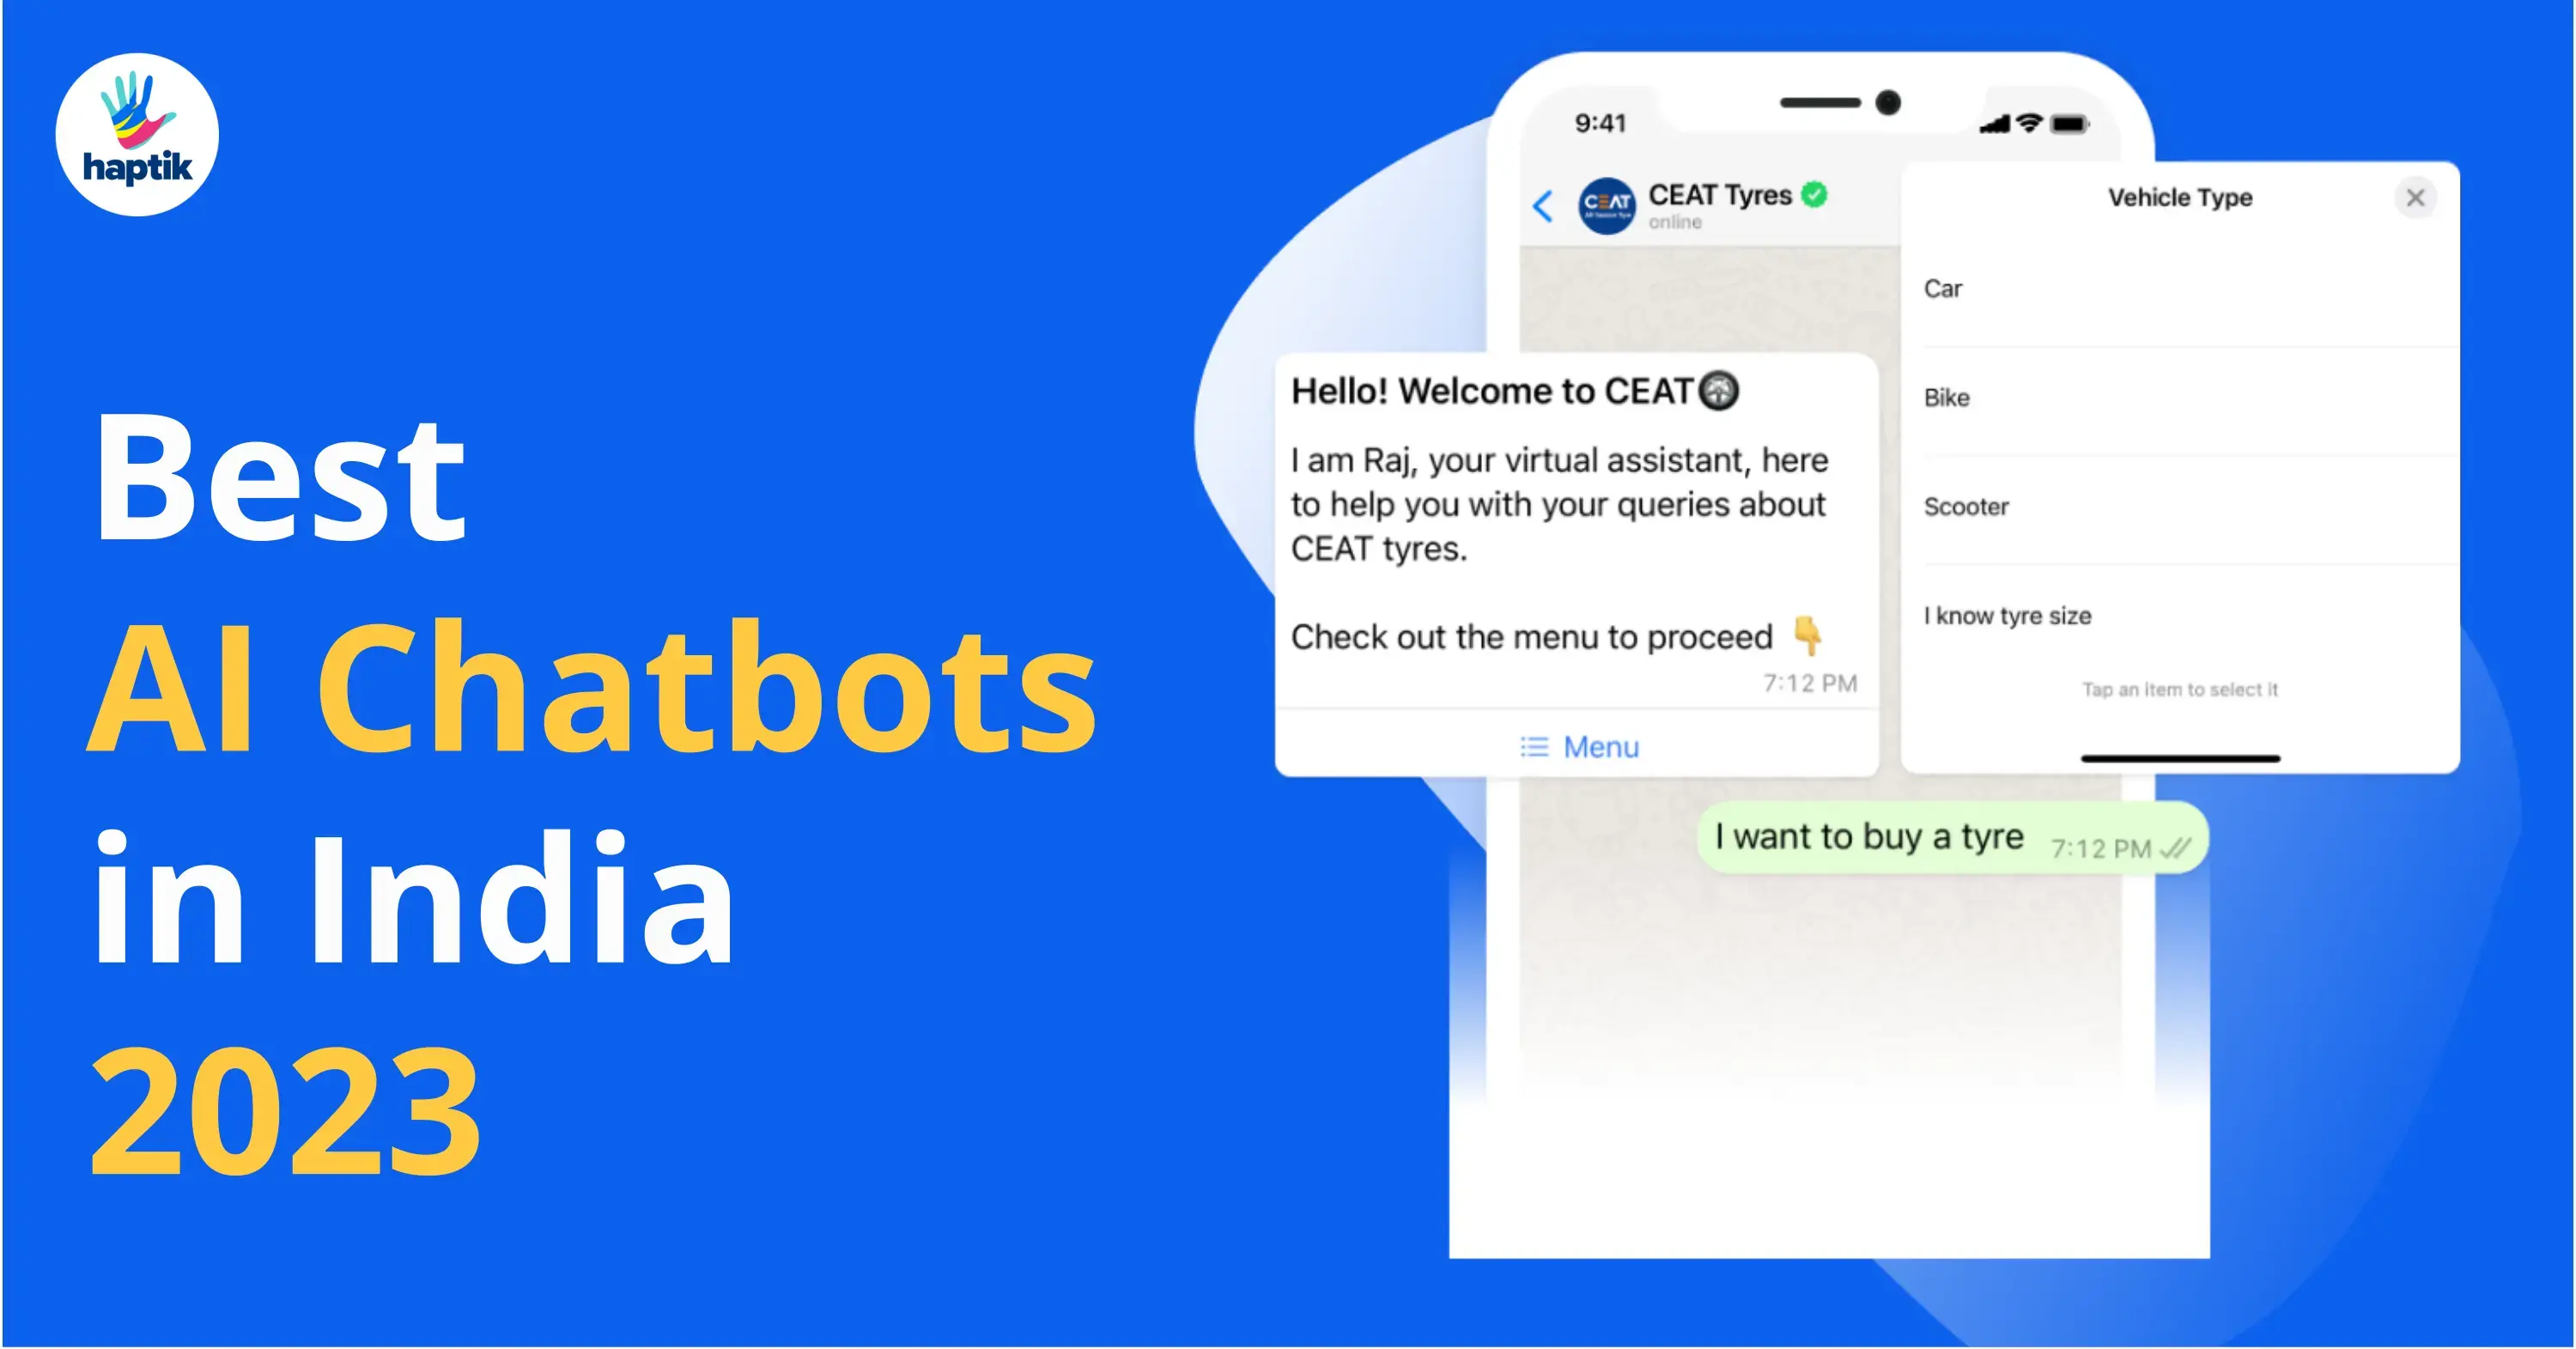 How to create the most effective chatbot Welcome Message